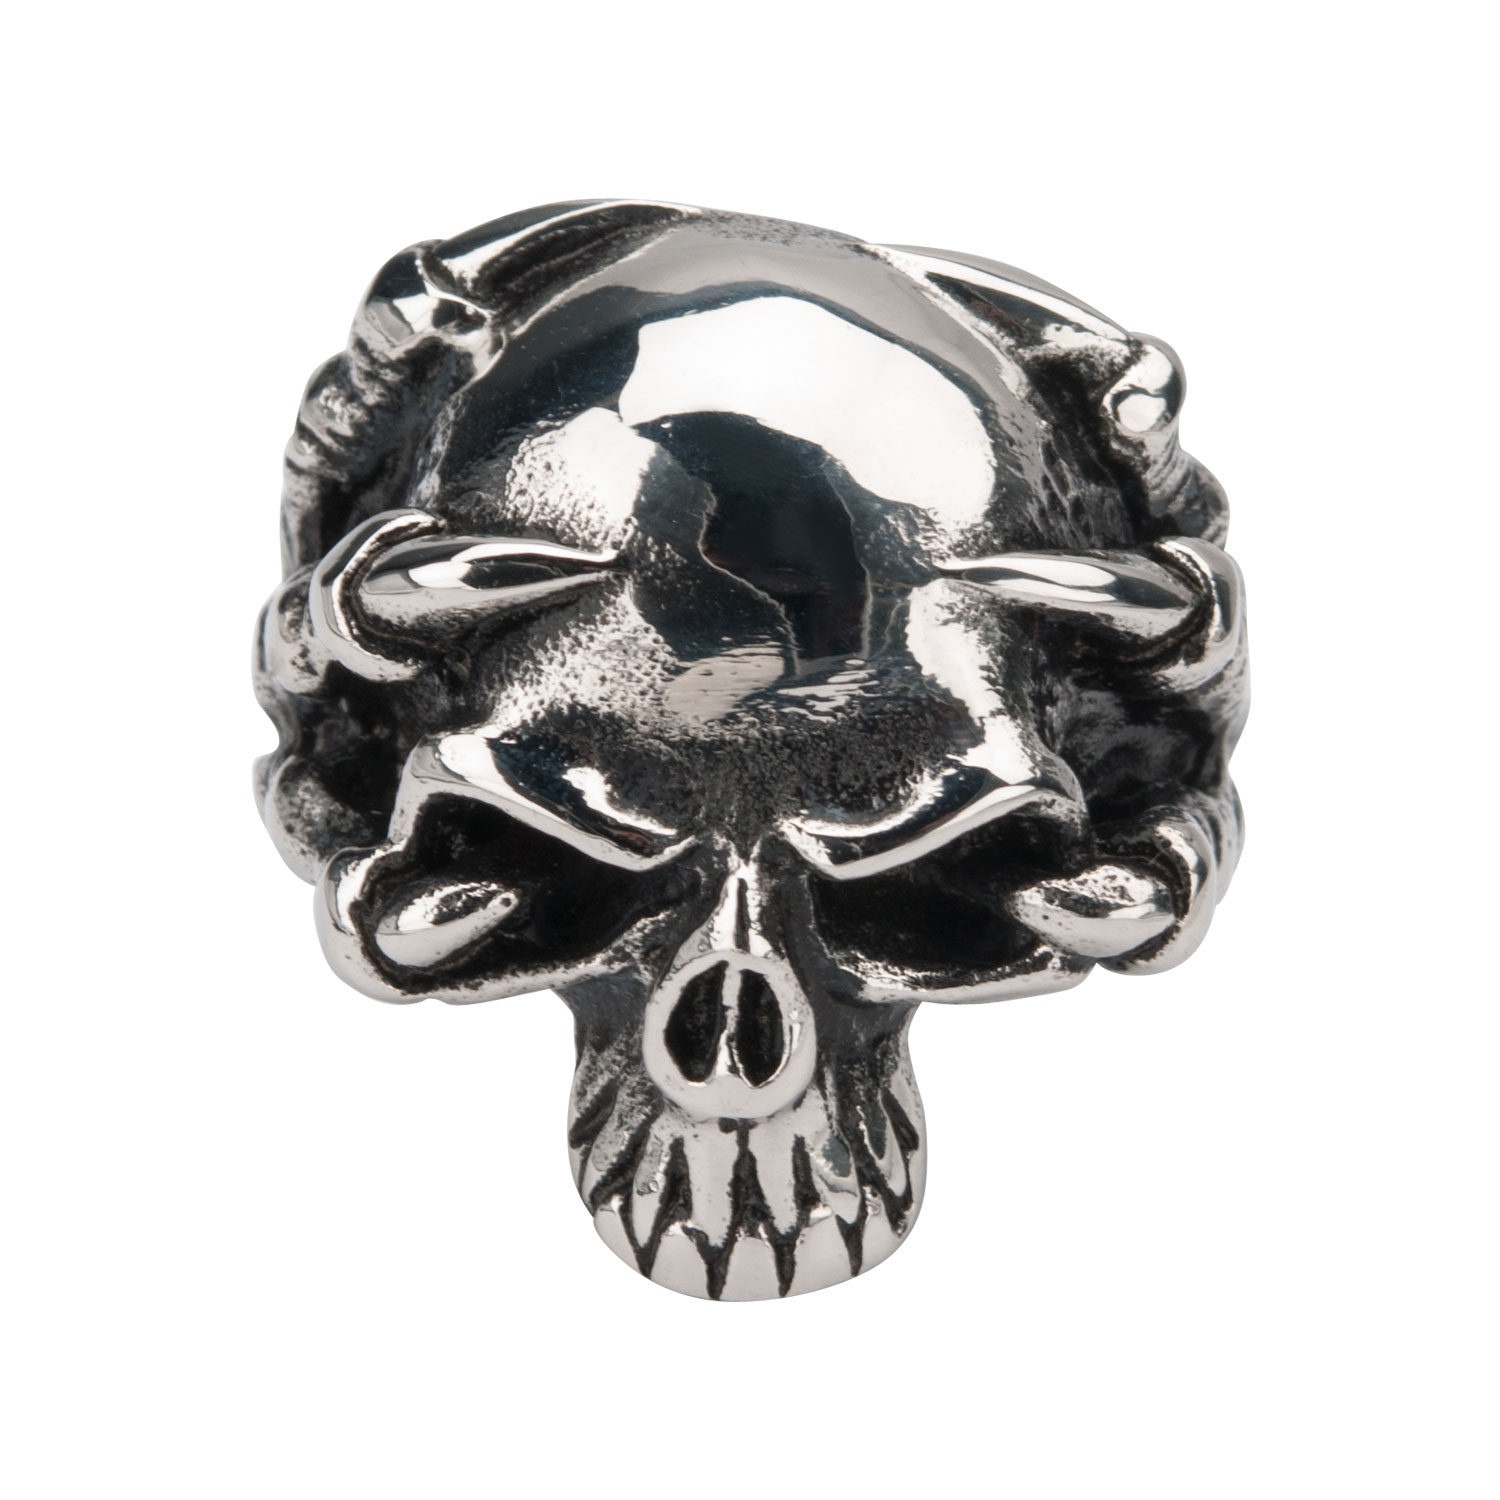 Black Oxidized Skull Ring with Claws Image 2 Ken Walker Jewelers Gig Harbor, WA